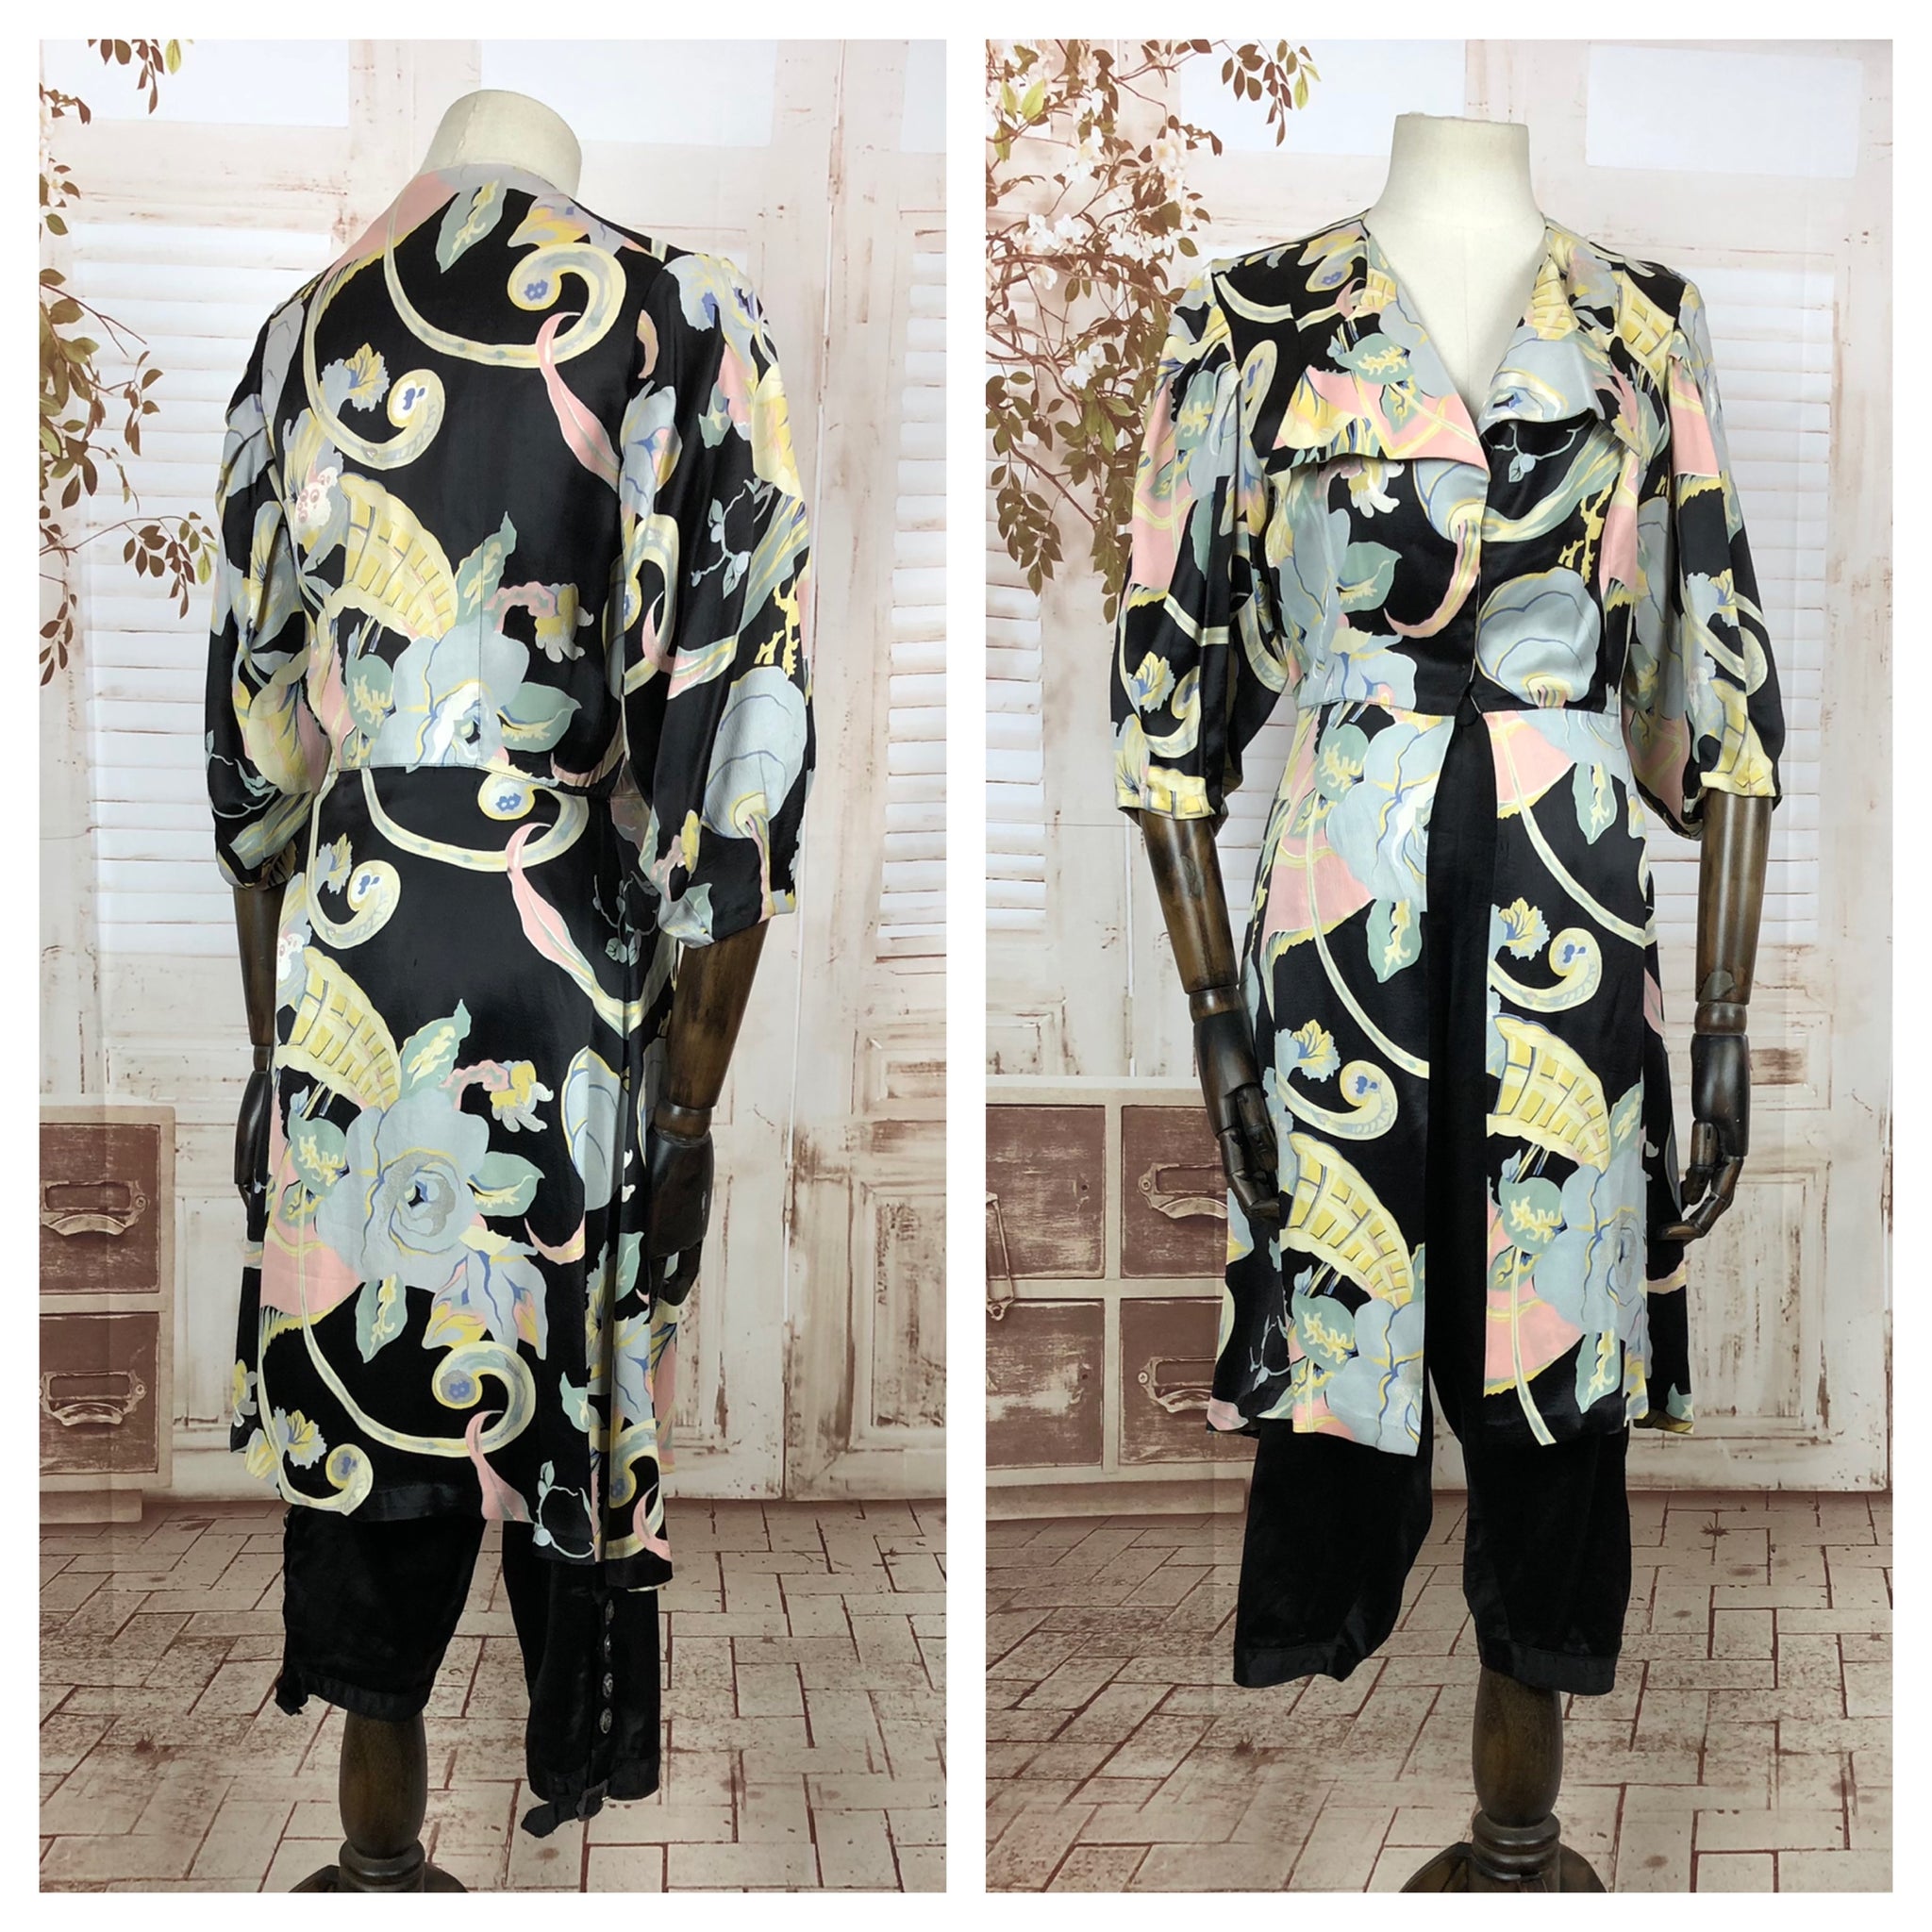 RESERVED FOR LESLEY - Original Vintage 1930s 30s Satin Tunic With Hawaiian Inspired Floral Print